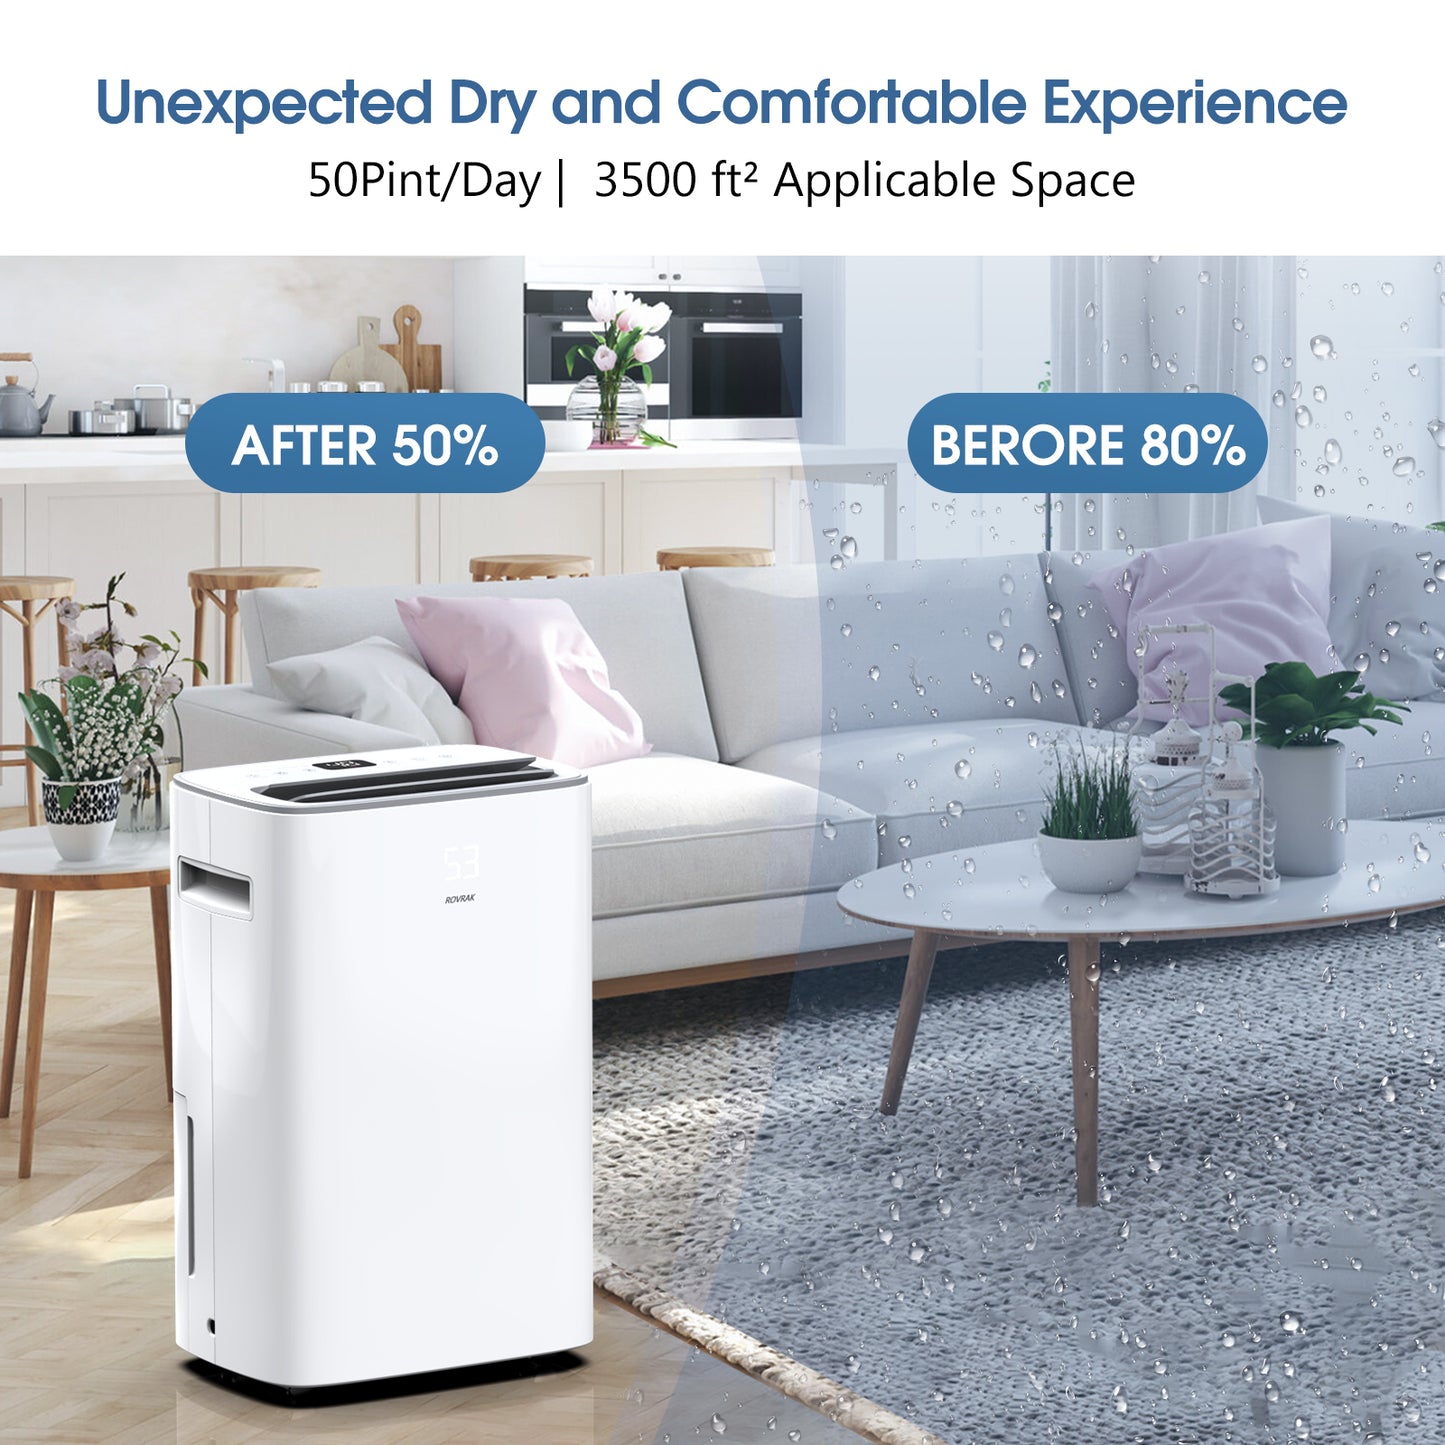 ROVRAK 50 Pint 3500 Sq. Ft. Dehumidifier 3 Modes Adjustable Household Dehumidifier, with Auto or Manual Drainage and 0.66 Gallon Water Tank Capacity for Living Room Wardrobe Garage